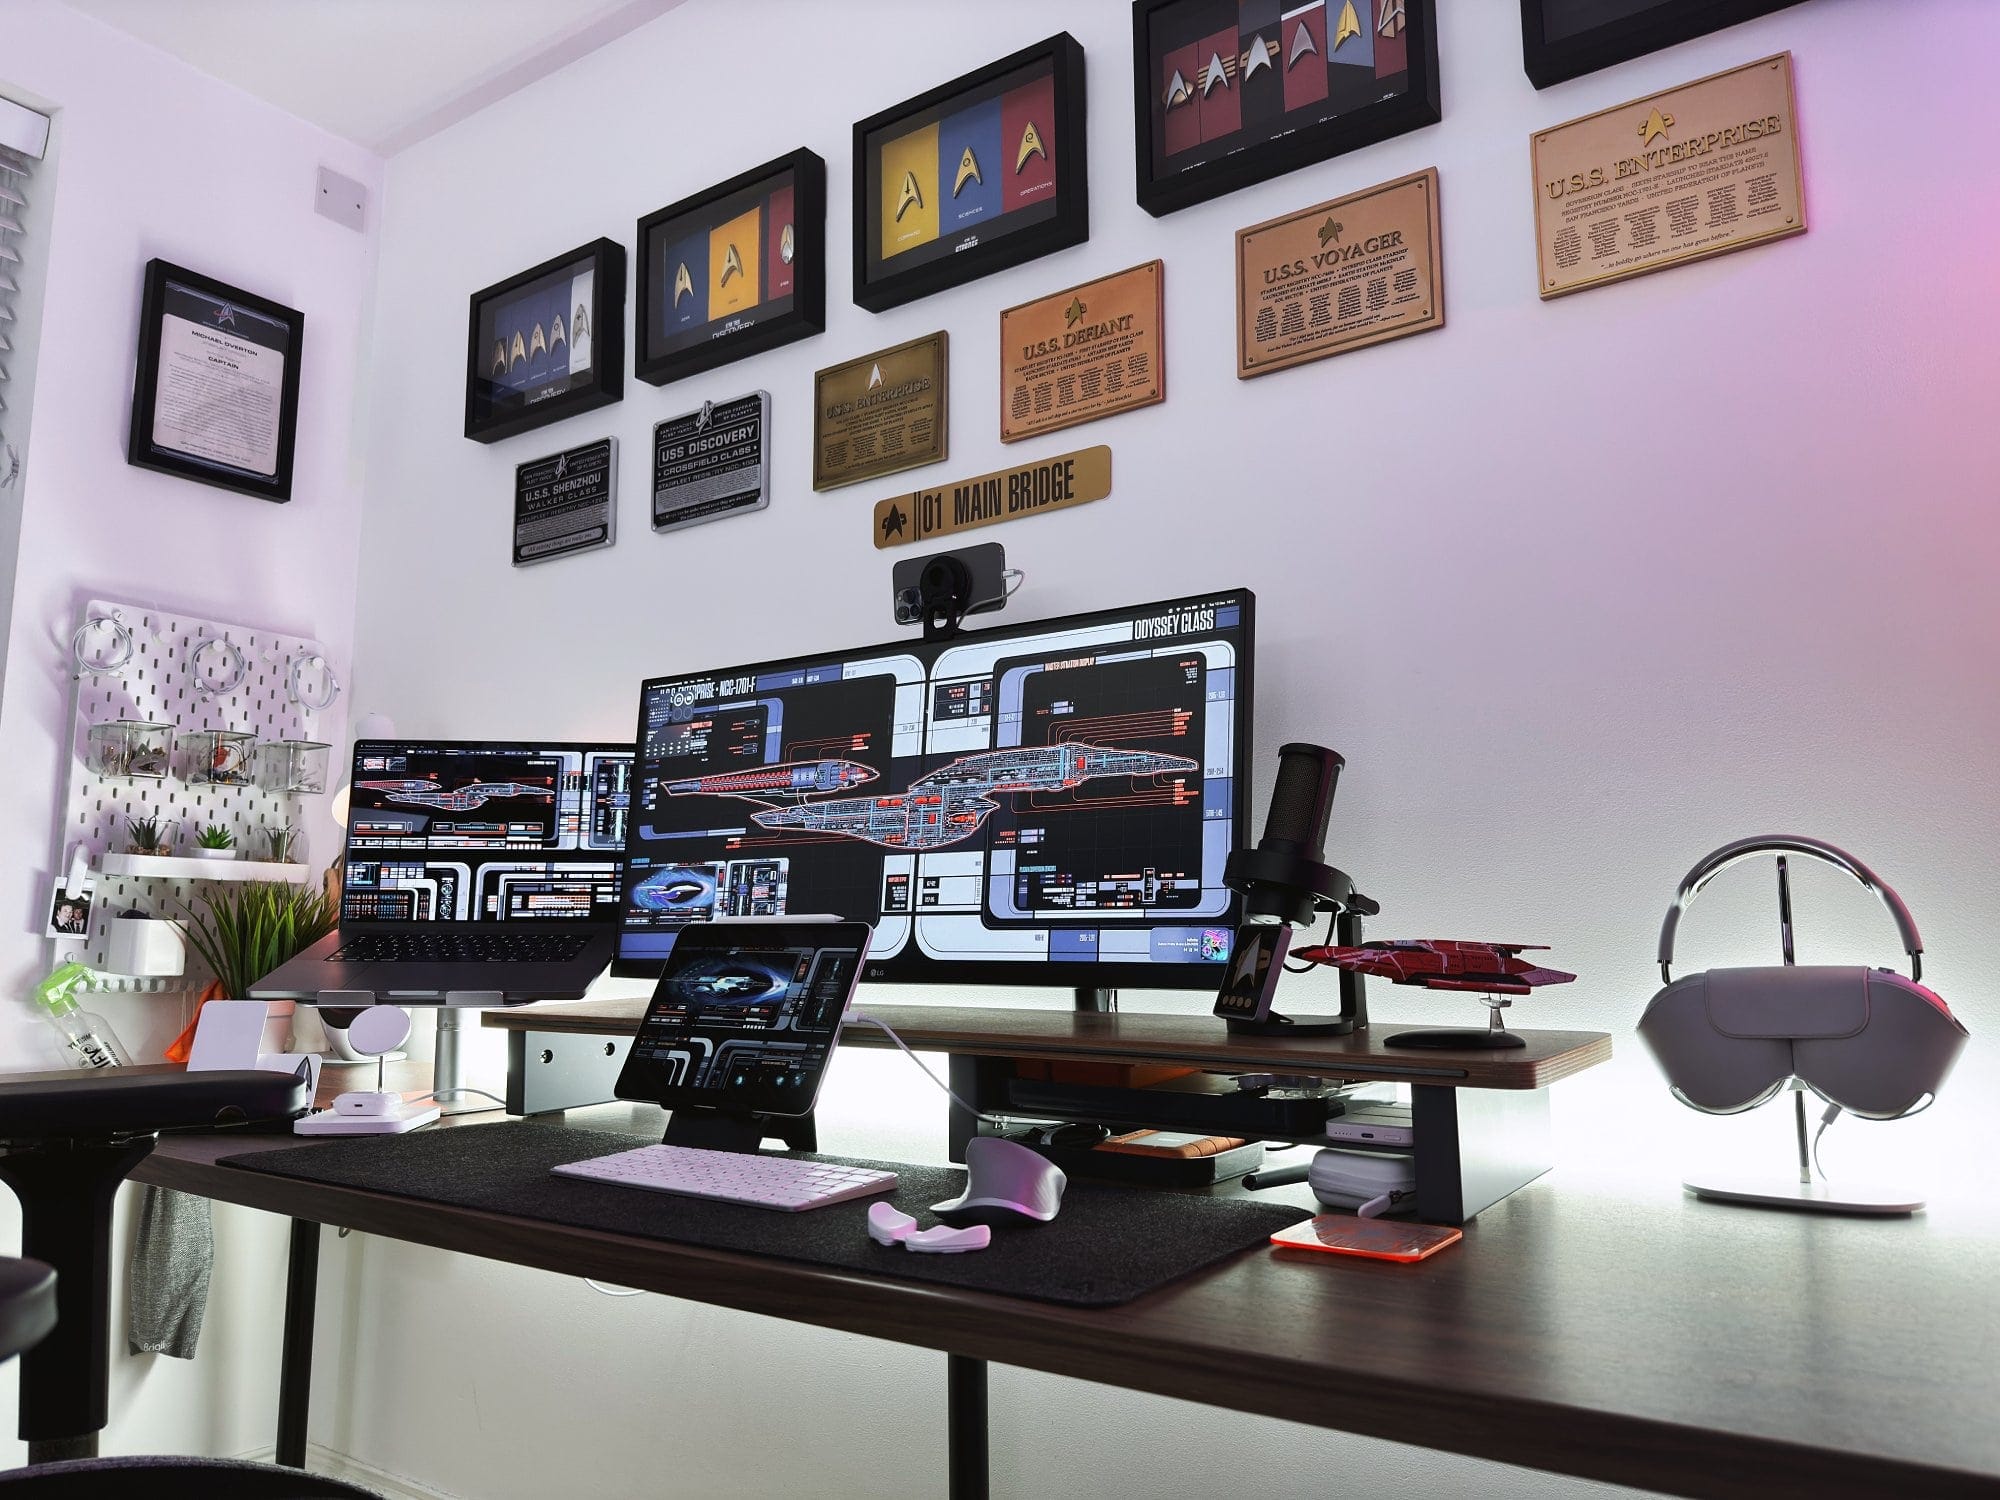 A sophisticated workstation with multiple screens and Star Trek memorabilia on the wall